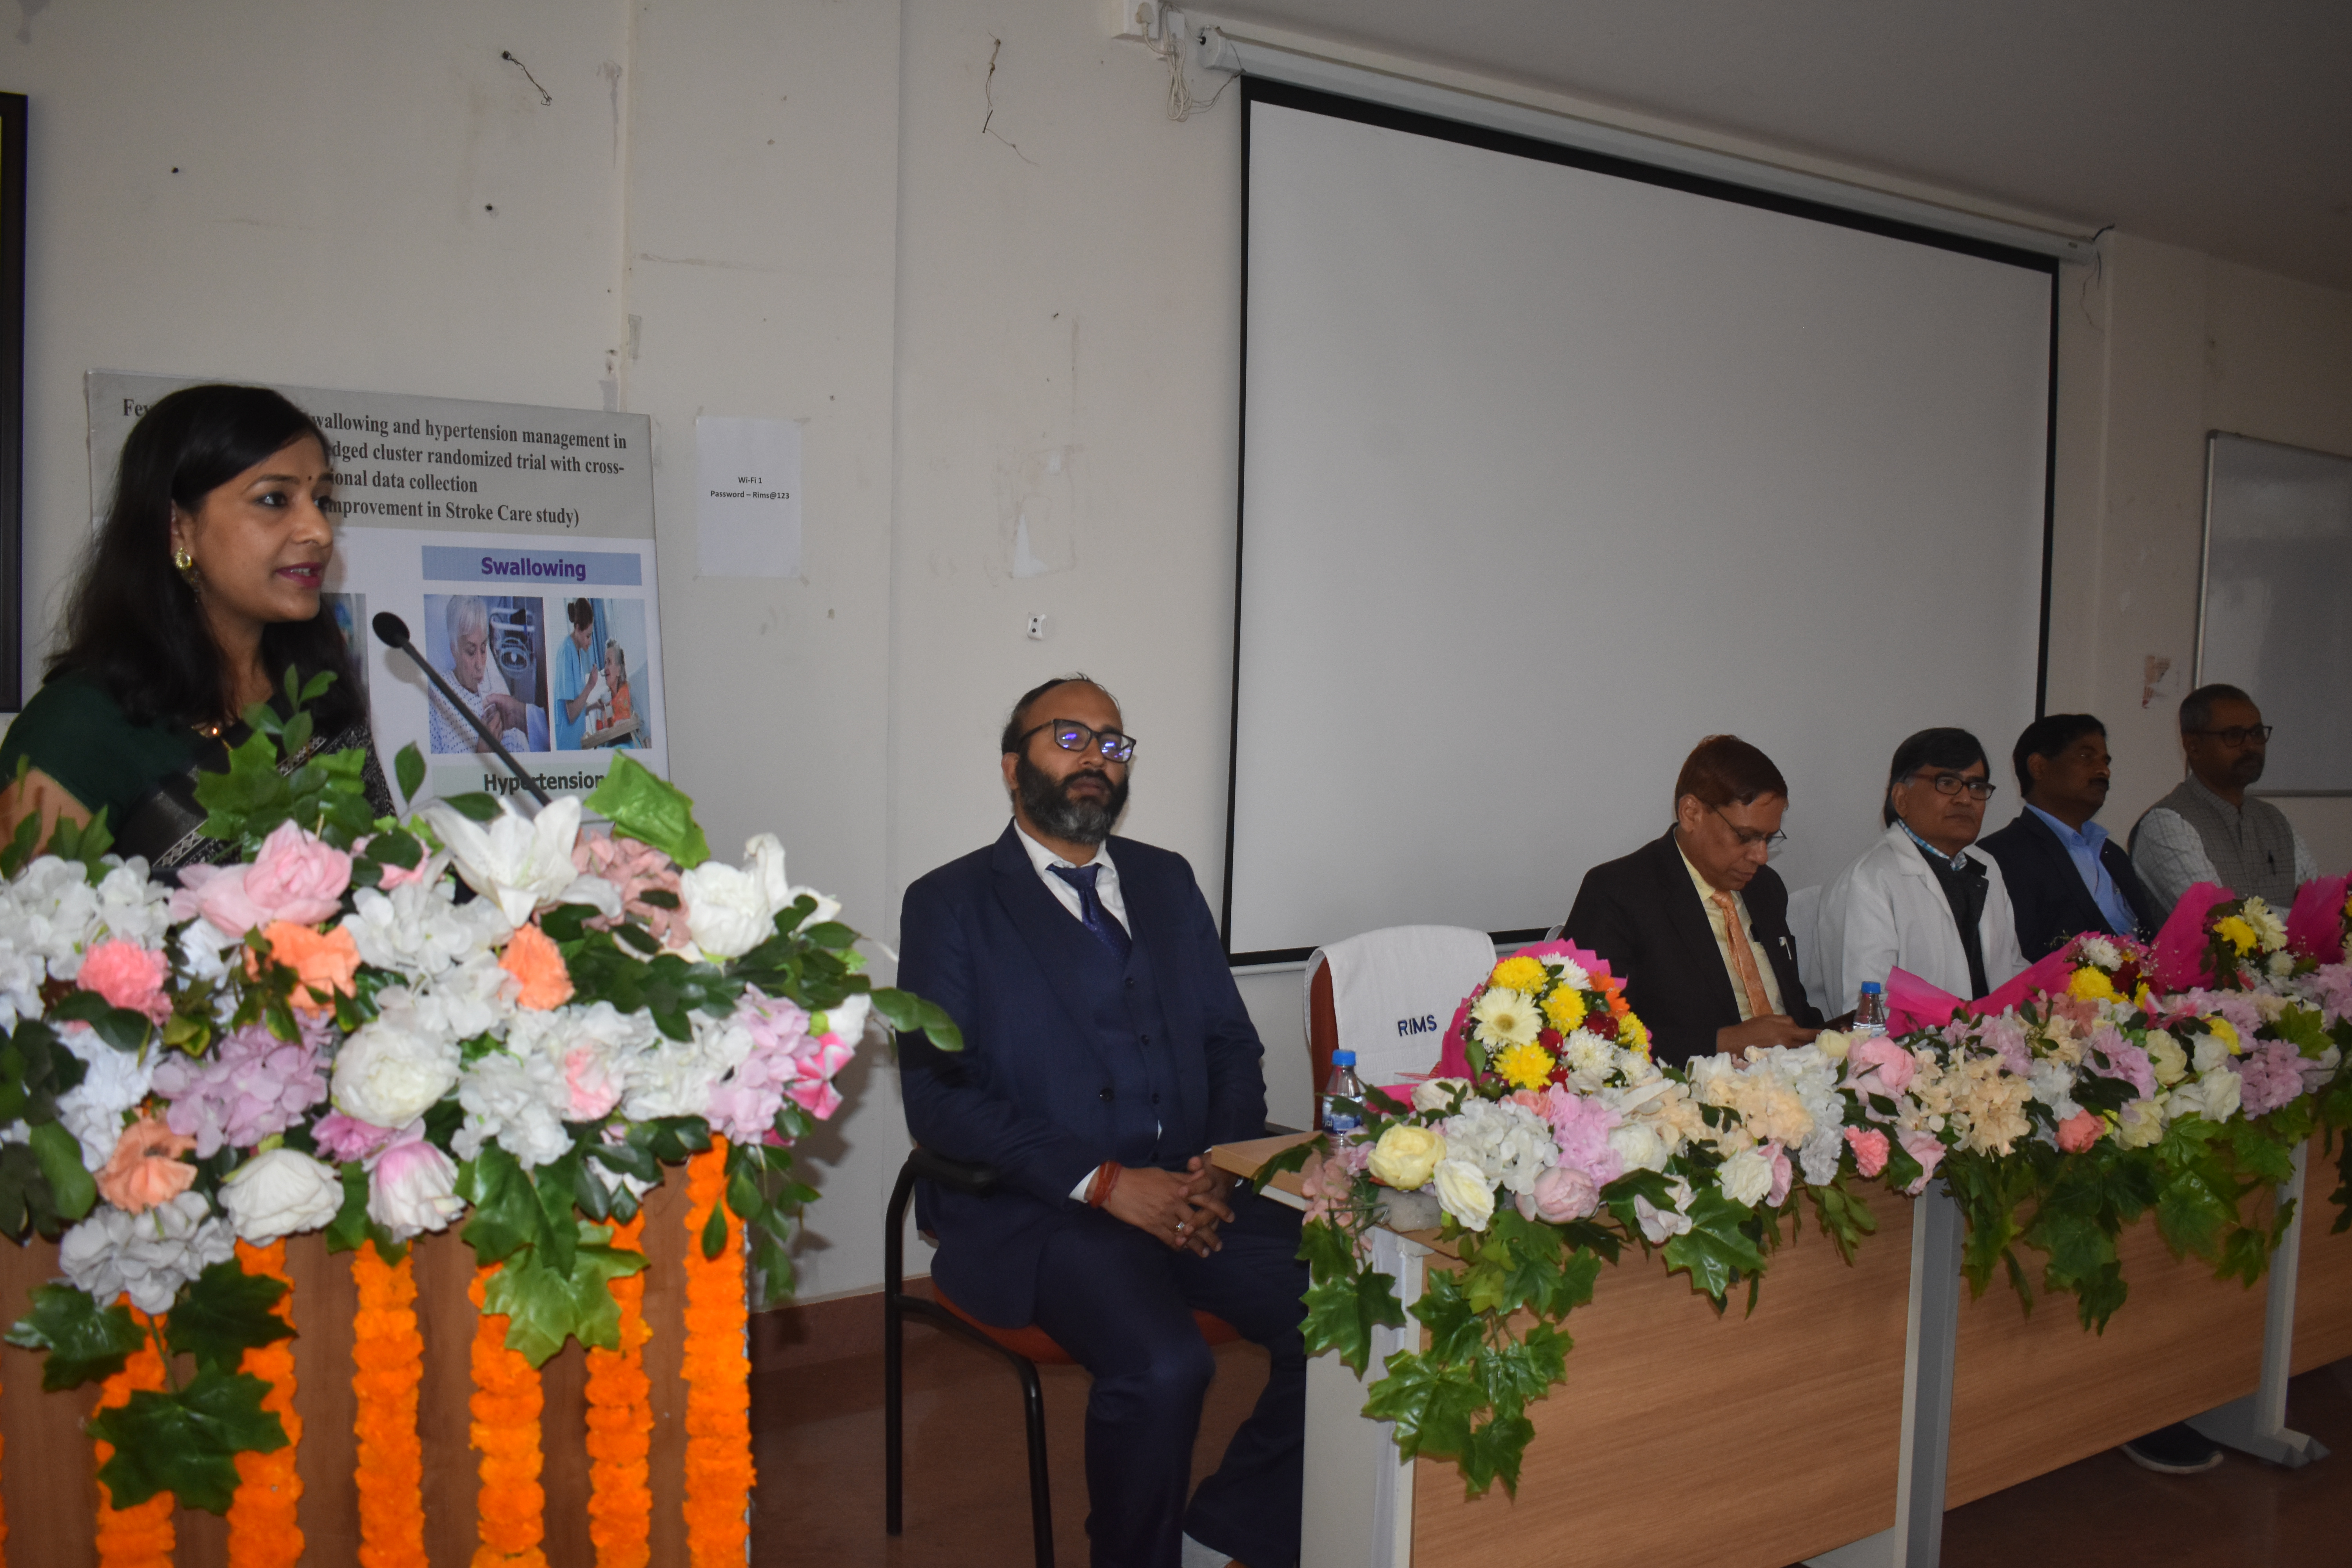 (Frist Intervention) Inauguration Ceremony of Fever, hyperglycemia, swallowing and hypertension management in acute stroke: Stepped wedged cluster randomized  trail with cross-sectional data collection( Indian Quality Improvement in Stroke Care Study) funded by Indian Council of Medical Research (ICMR), New Delhi. Dated : 7th March 2024